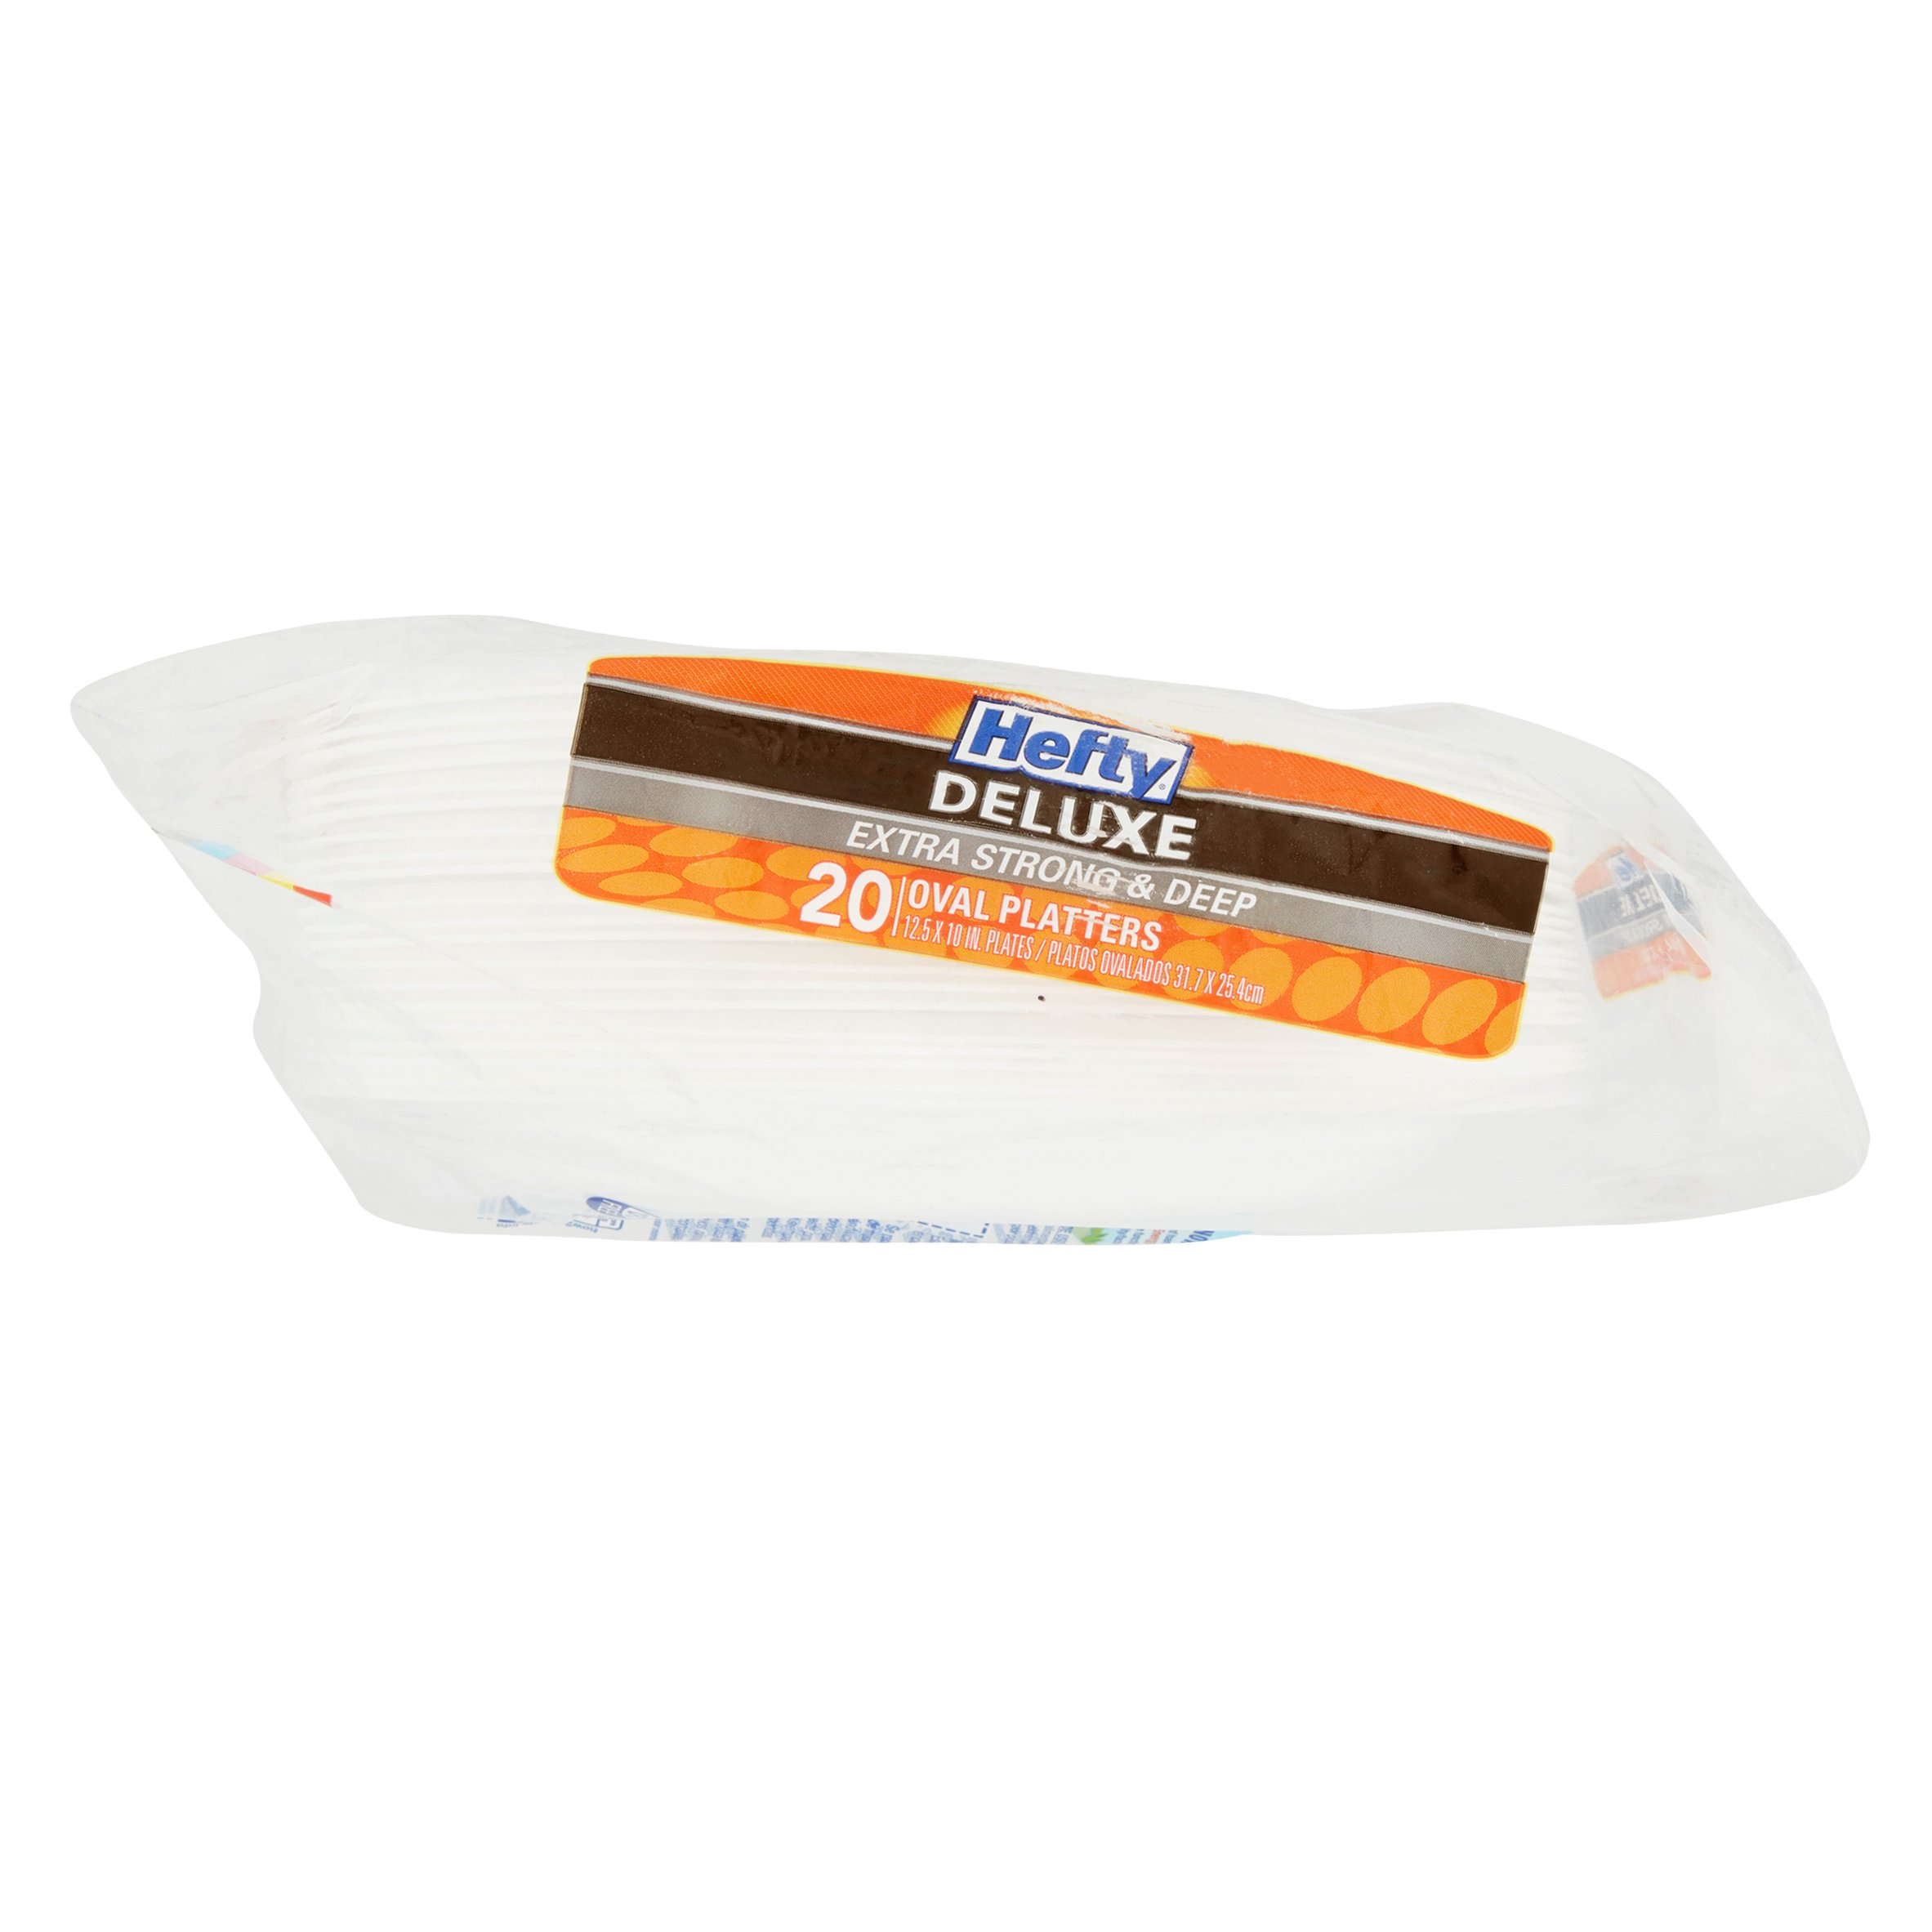 Hefty Deluxe Extra Strong & Deep Foam Platters, Oval, White, 10x12 Inch, 20 Count - image 5 of 5